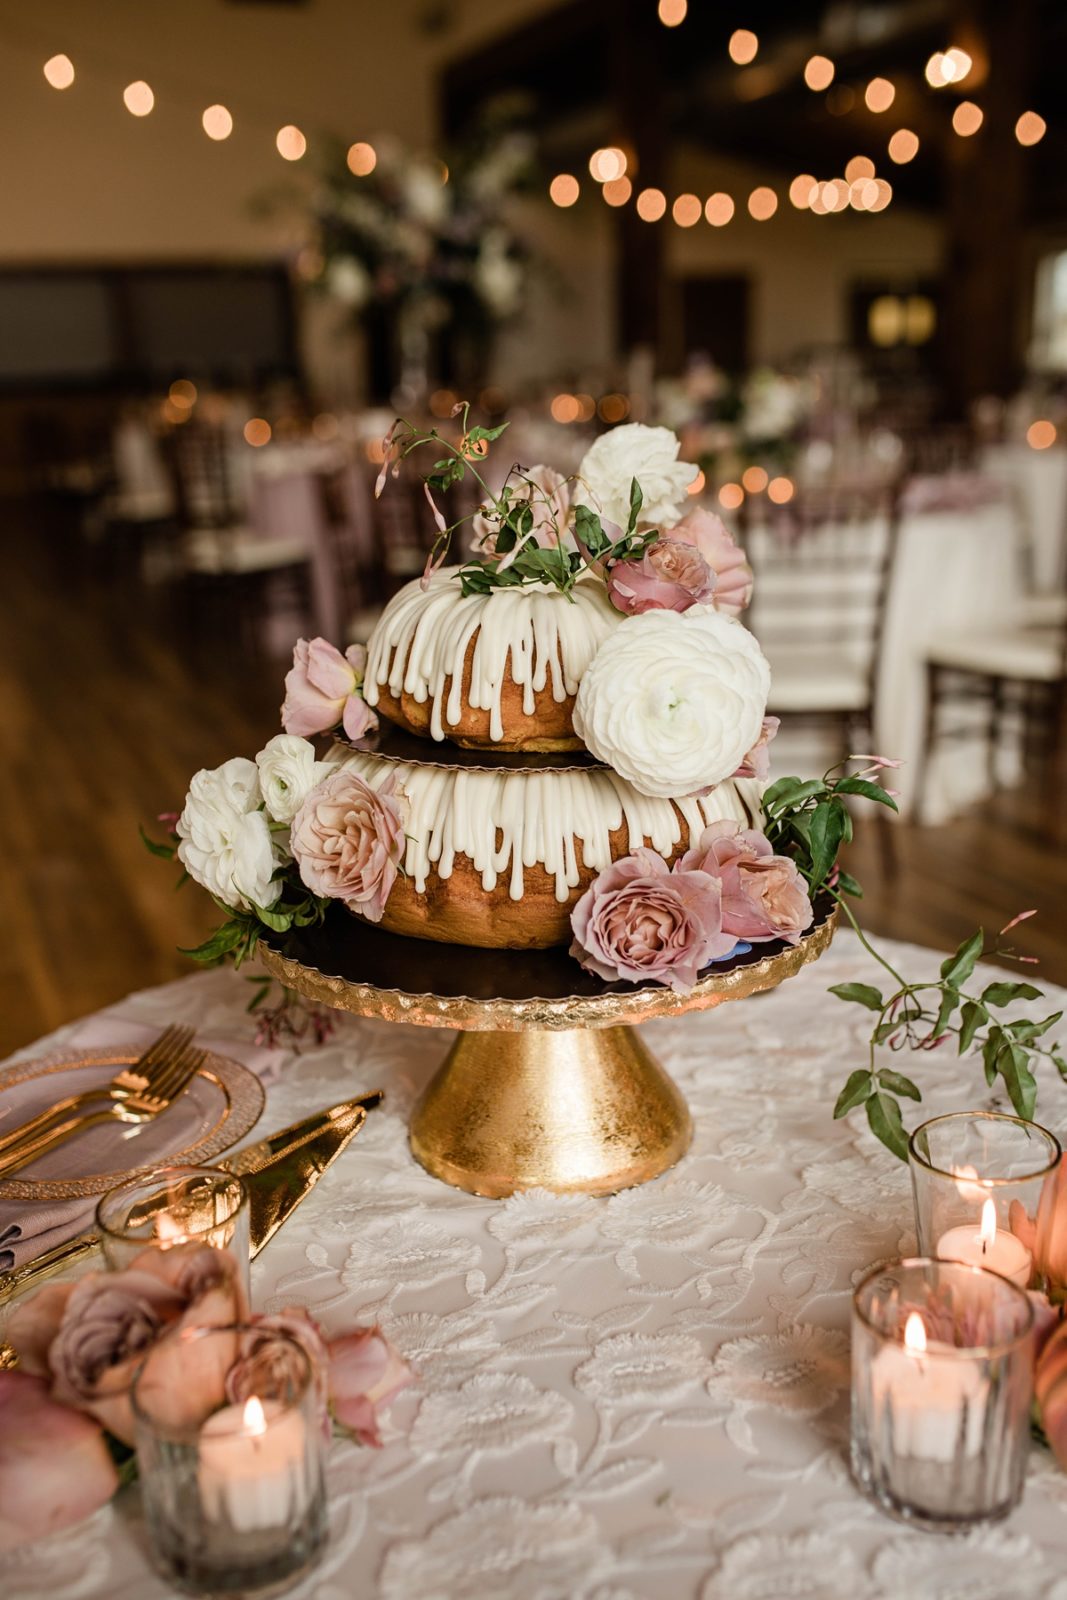 double layer wedding bundt cake with flowers.